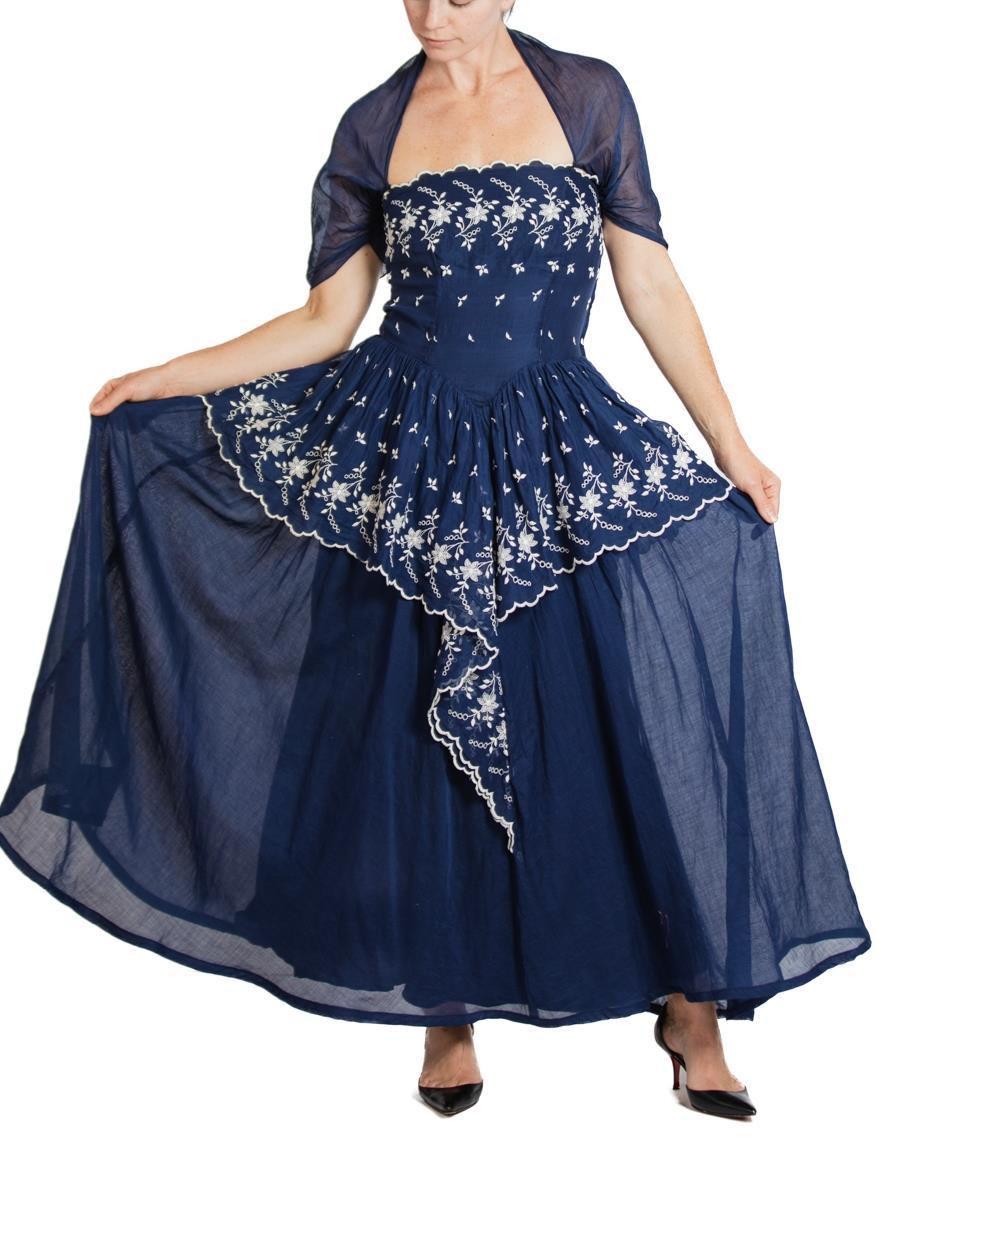 1940S Nave Blue & White Cotton Voile Embroidered Gown With Sheer Jacket For Sale 4